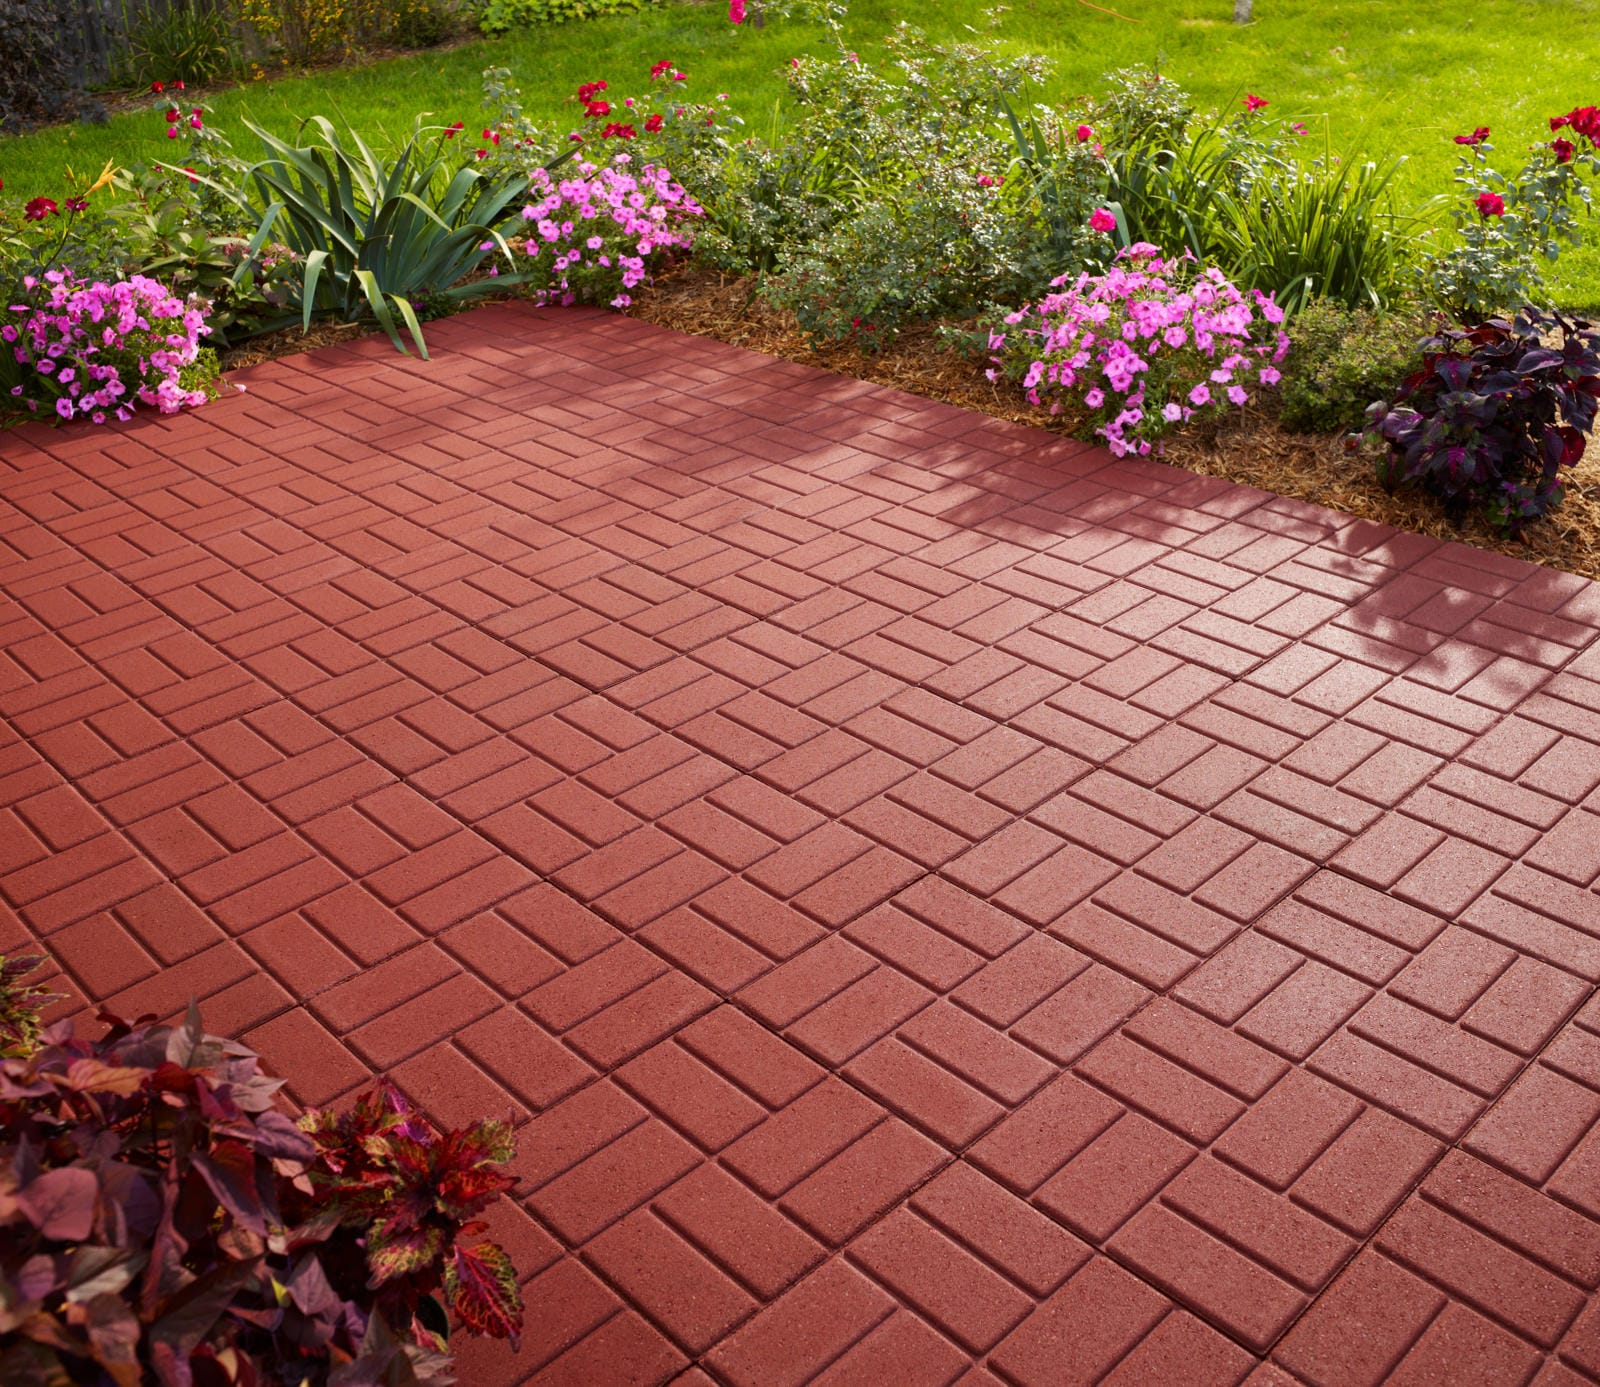 Maryland Decking Paver Patio Construction Service Near Me Maple Lawn Md